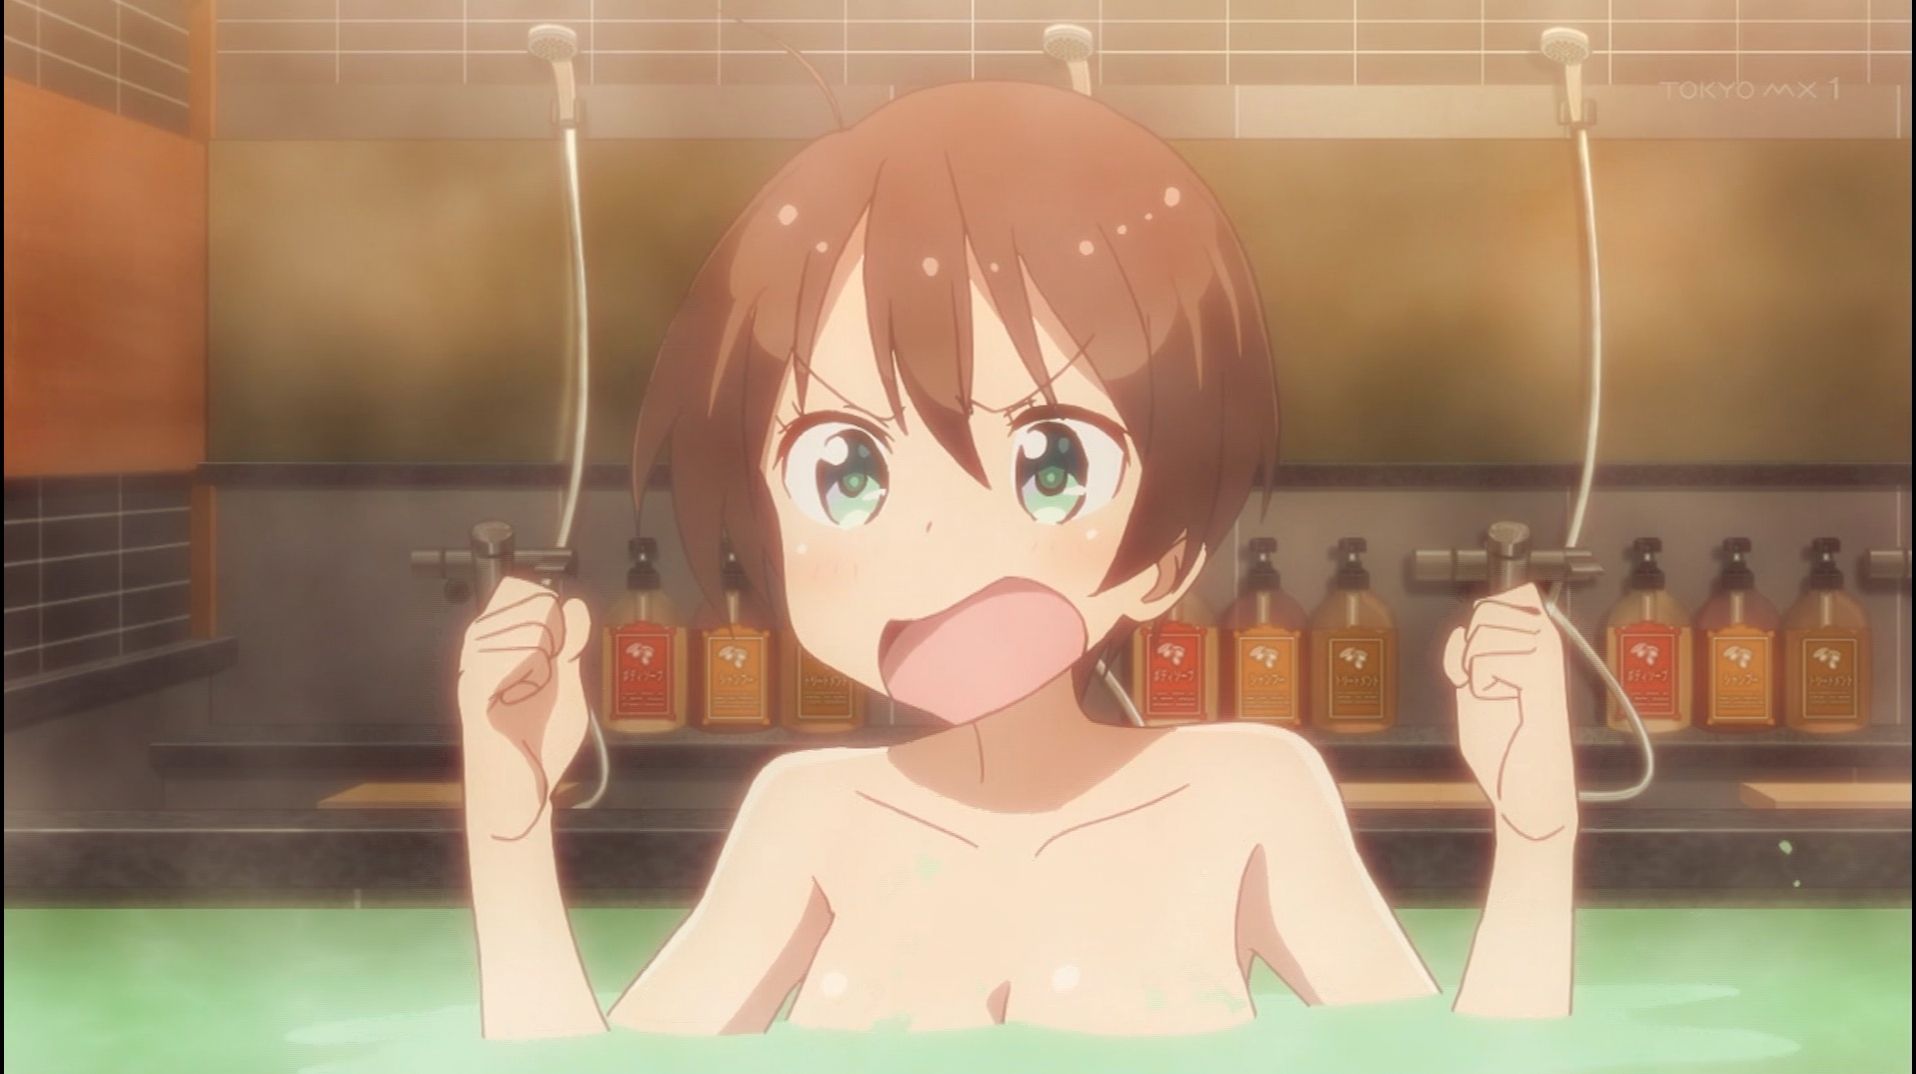 [Artificial mouth times] "NEW GAME! "Of all nine episodes, Yuri hifumi nude too たまらな of wwwwwwwww 13